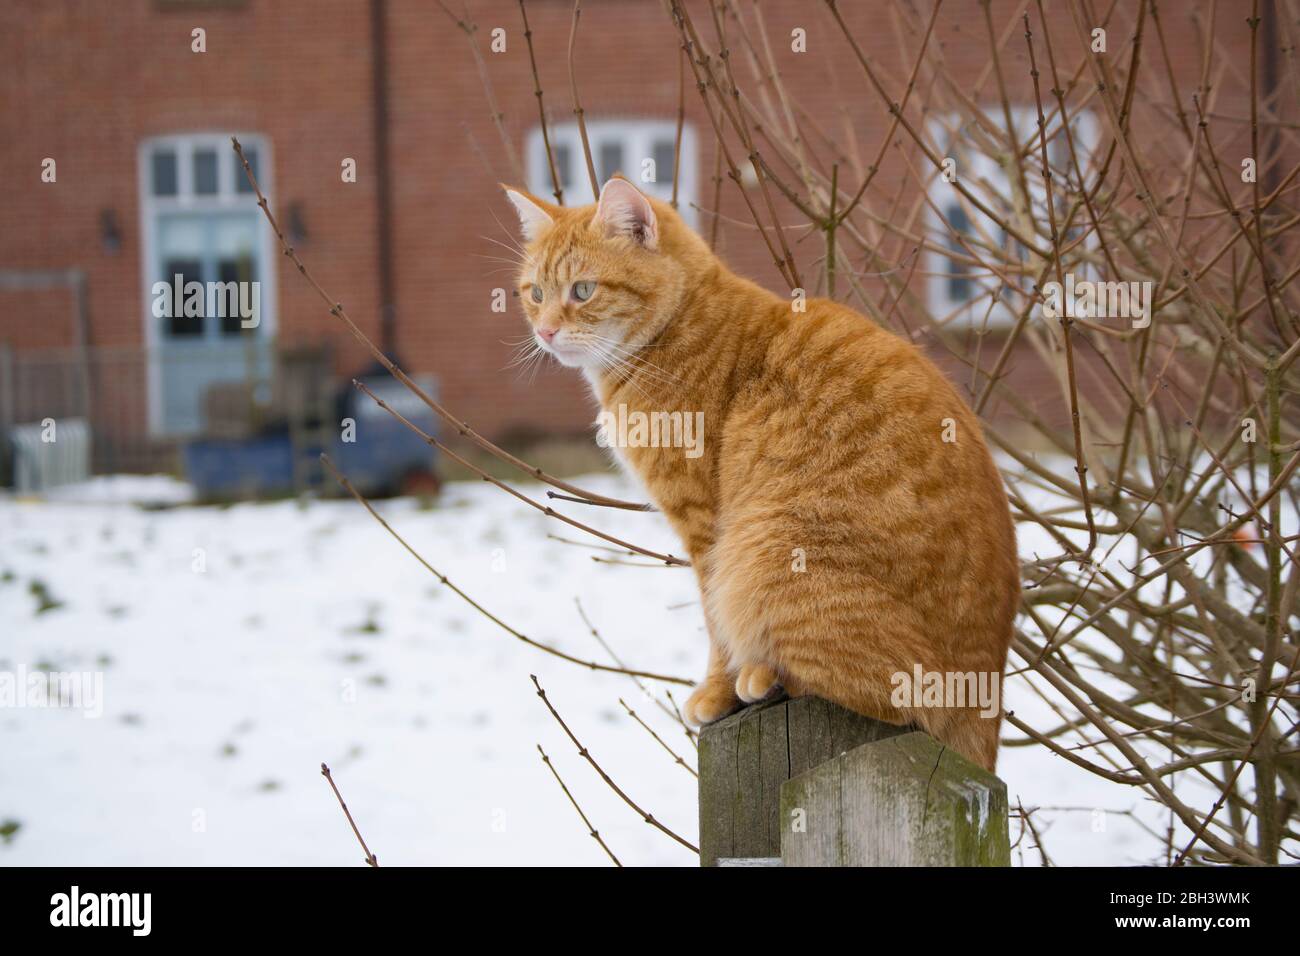 A ginger cat against a blurred snowy background Stock Photo